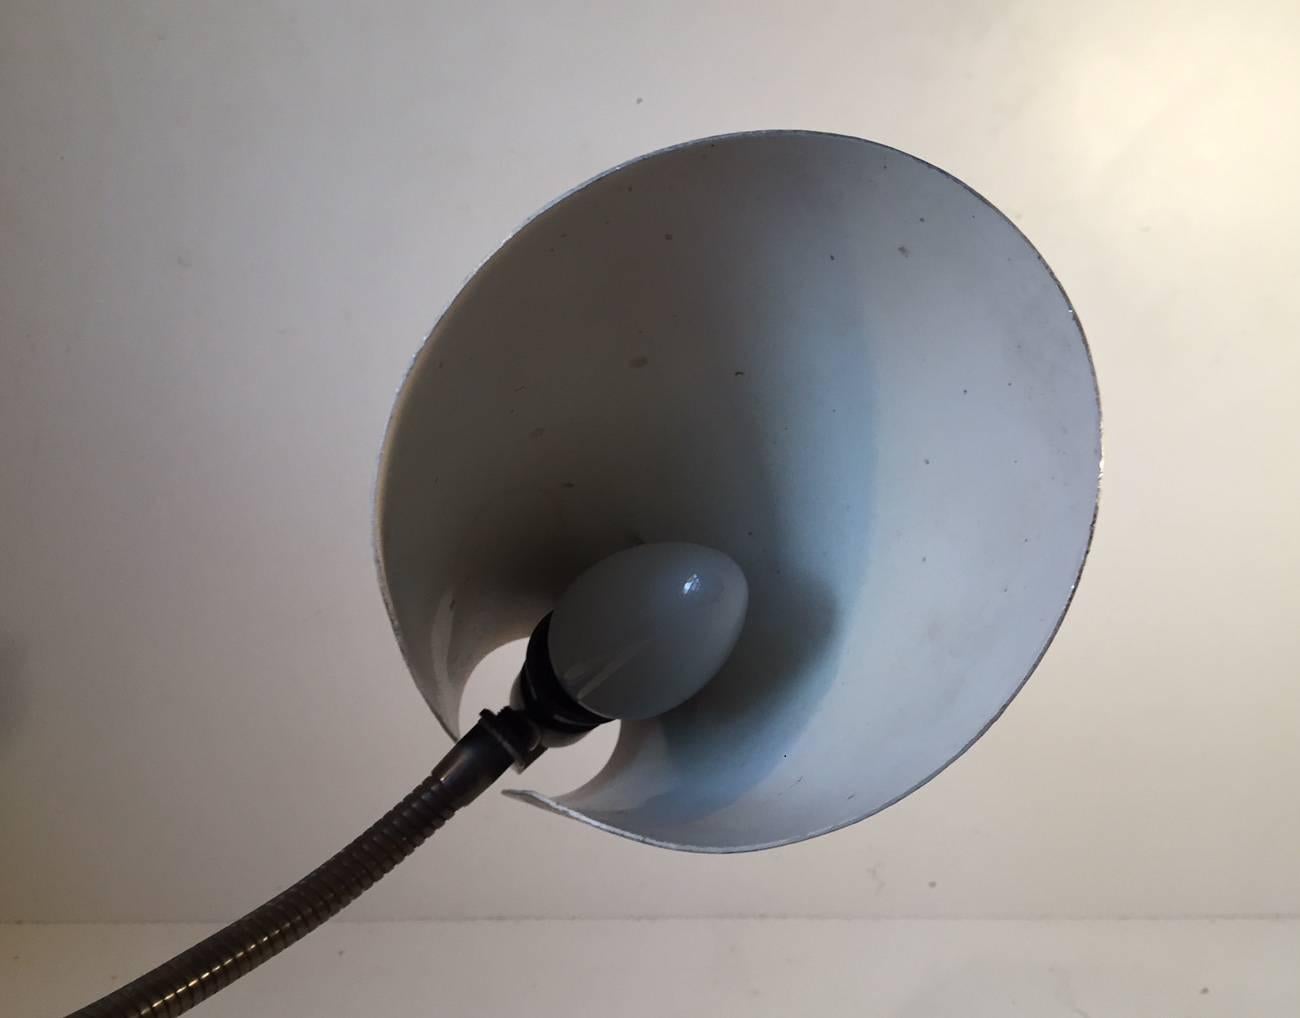 Powder-Coated Black Danish Wall Lamp with Brass Detailing by Fog & Mørup, 1950s